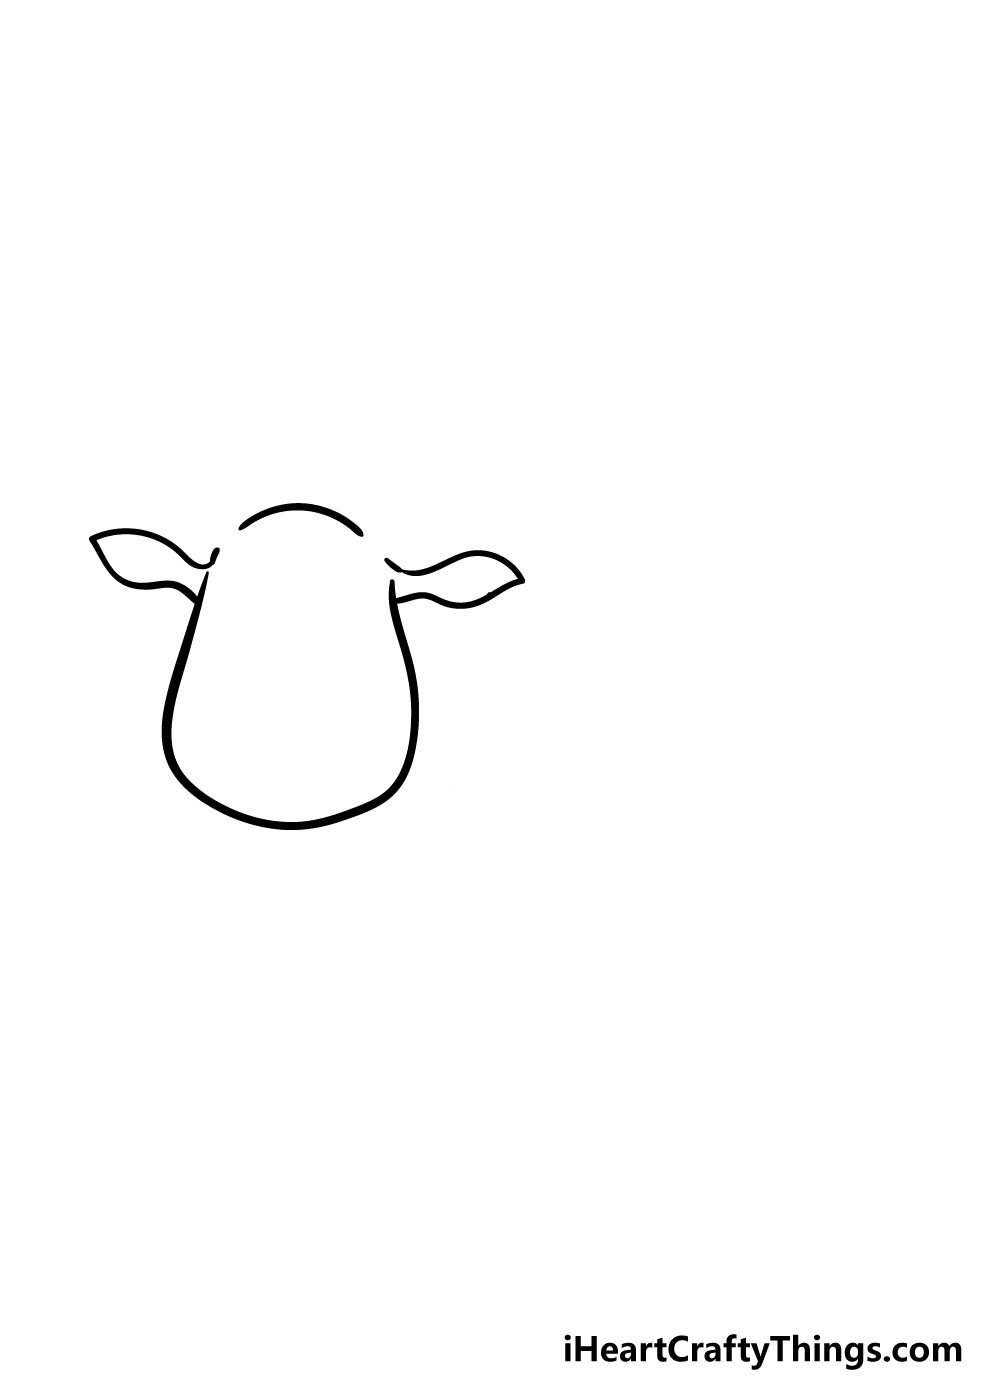 cow drawing step 2